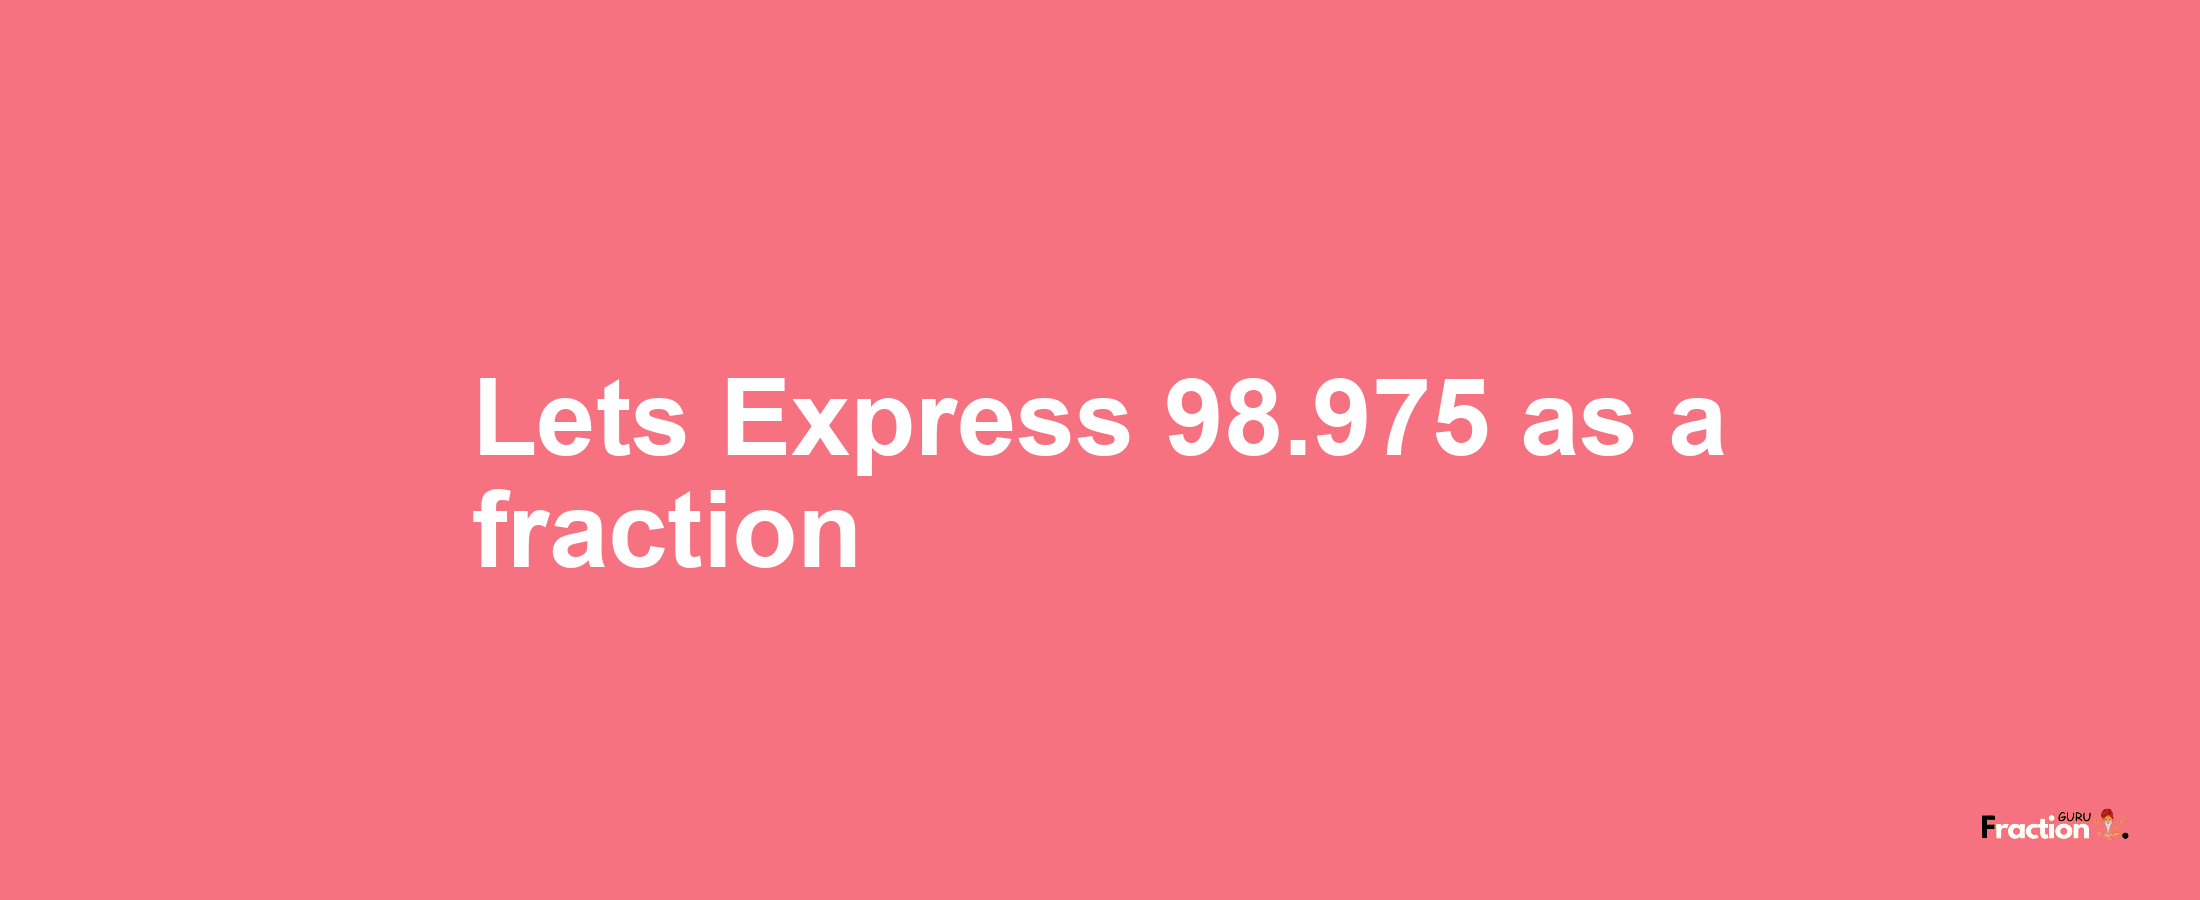 Lets Express 98.975 as afraction